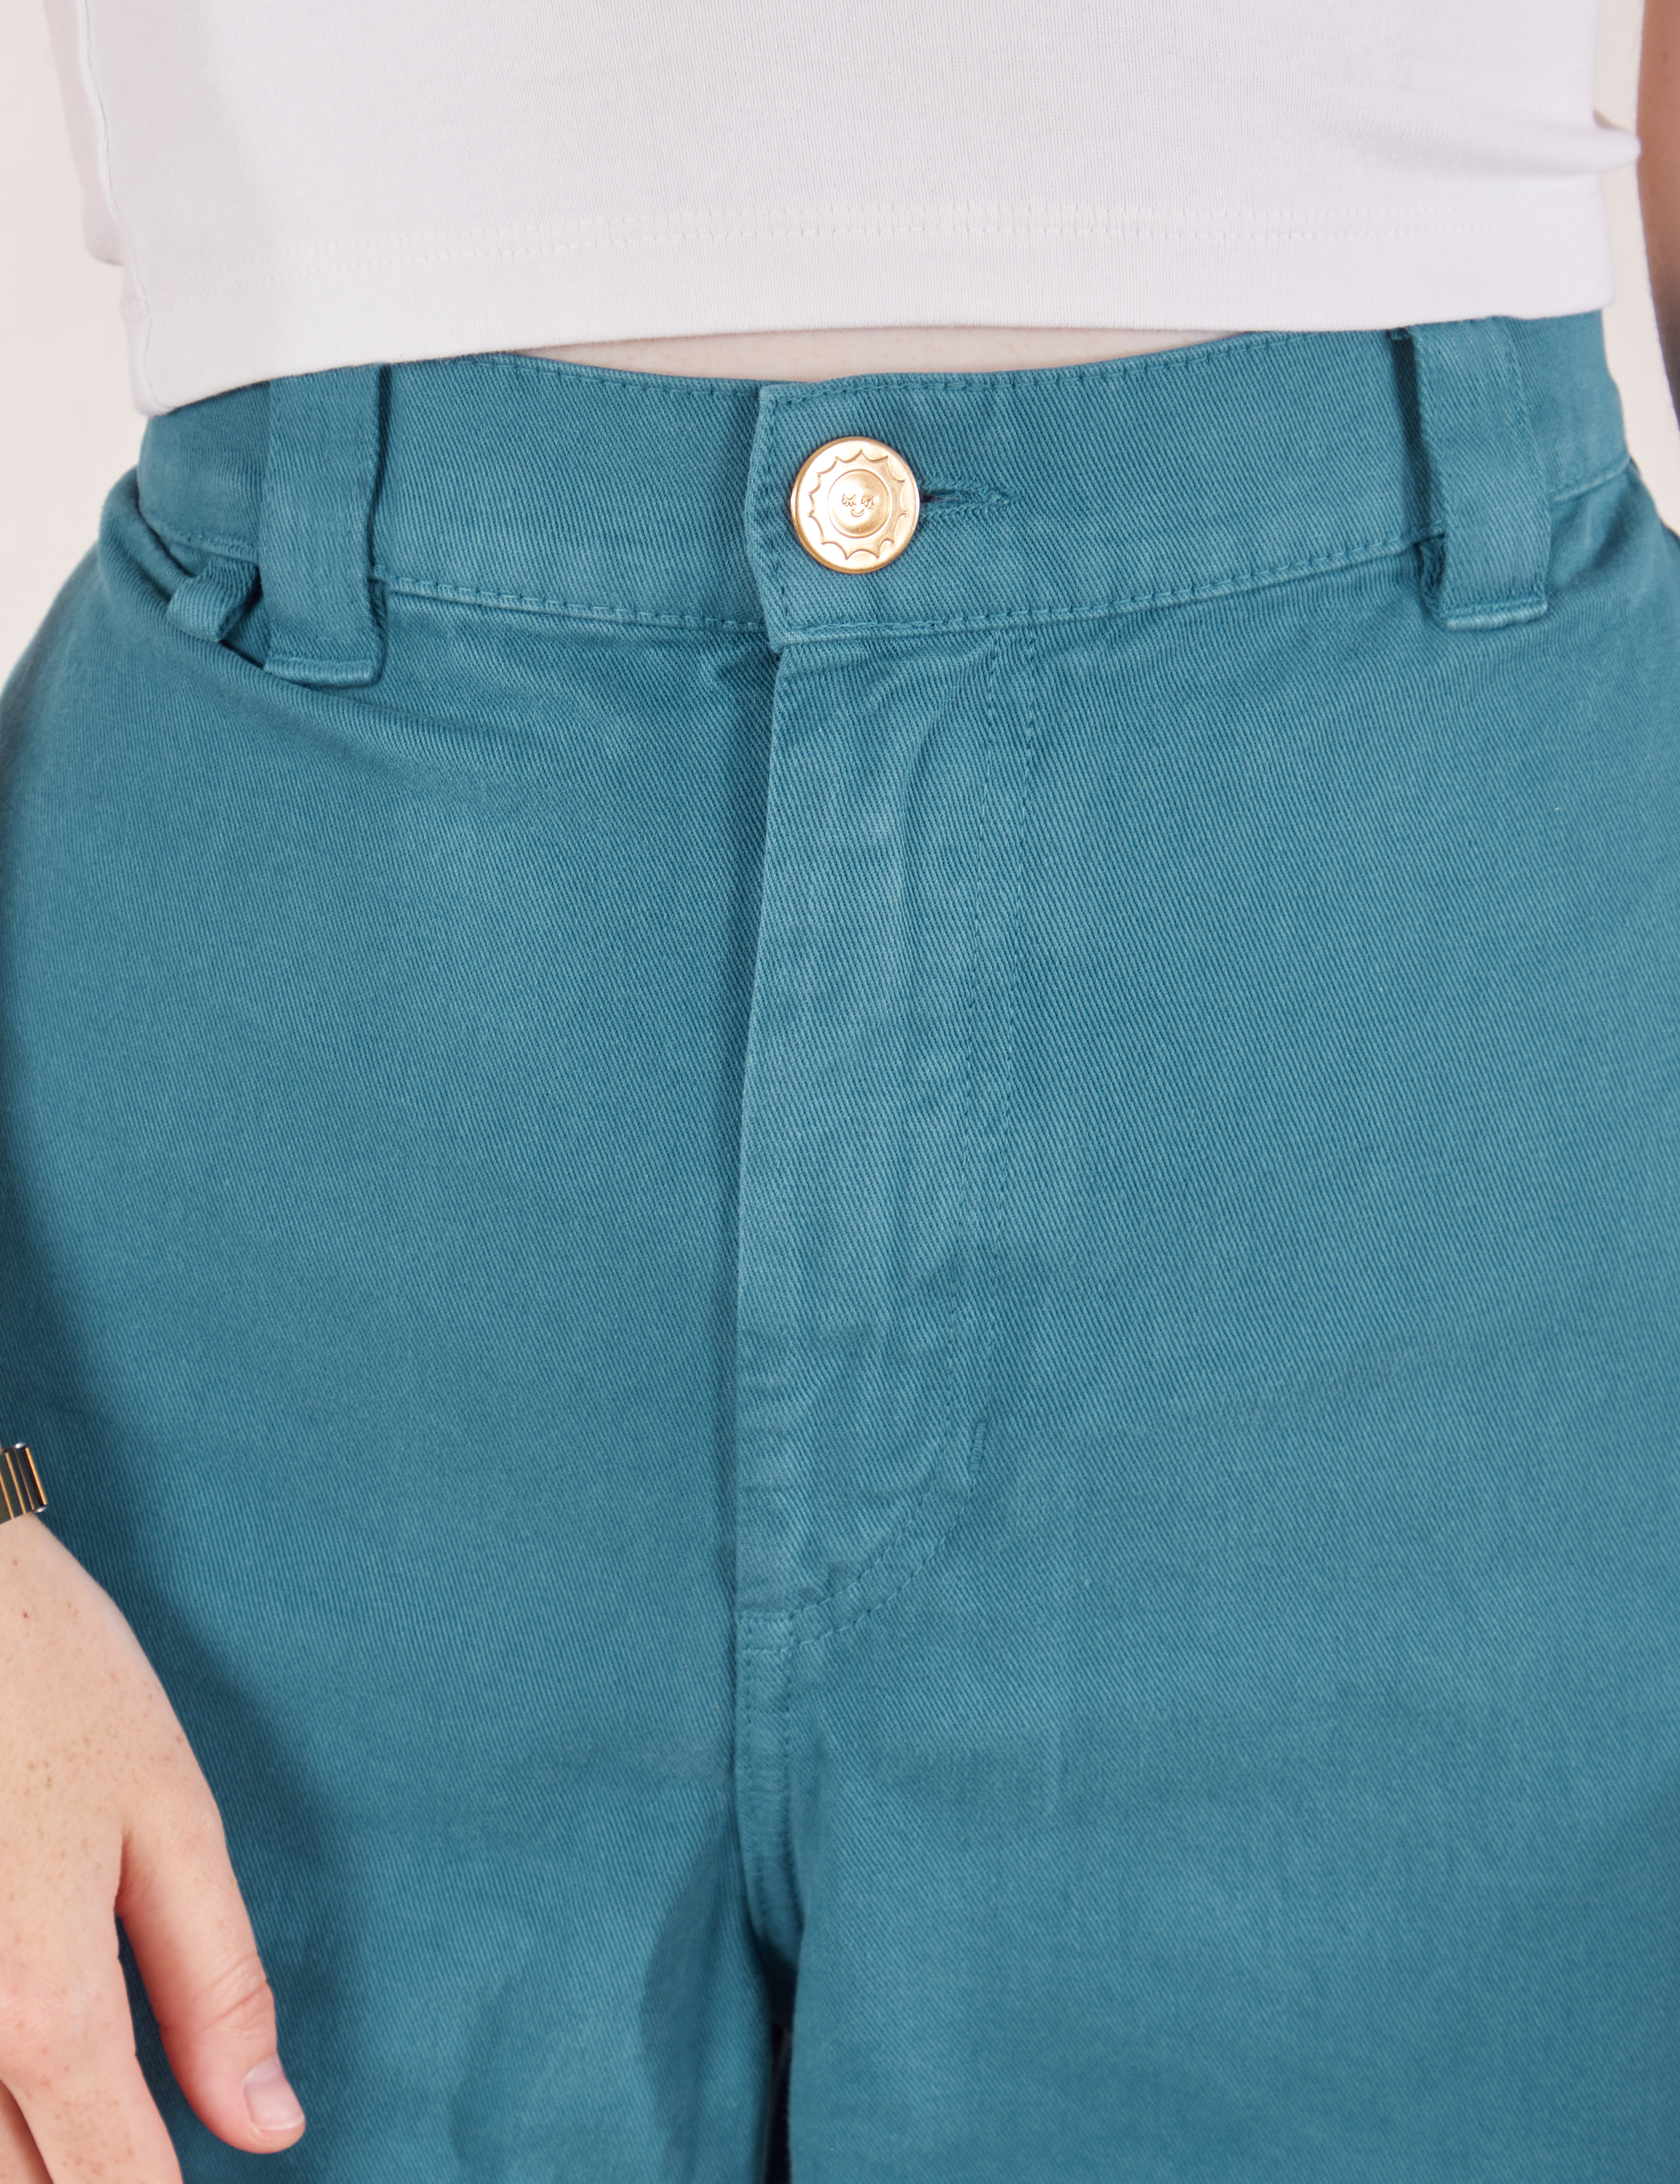 Petite Bell Bottoms in Marine Blue front close up on Hana